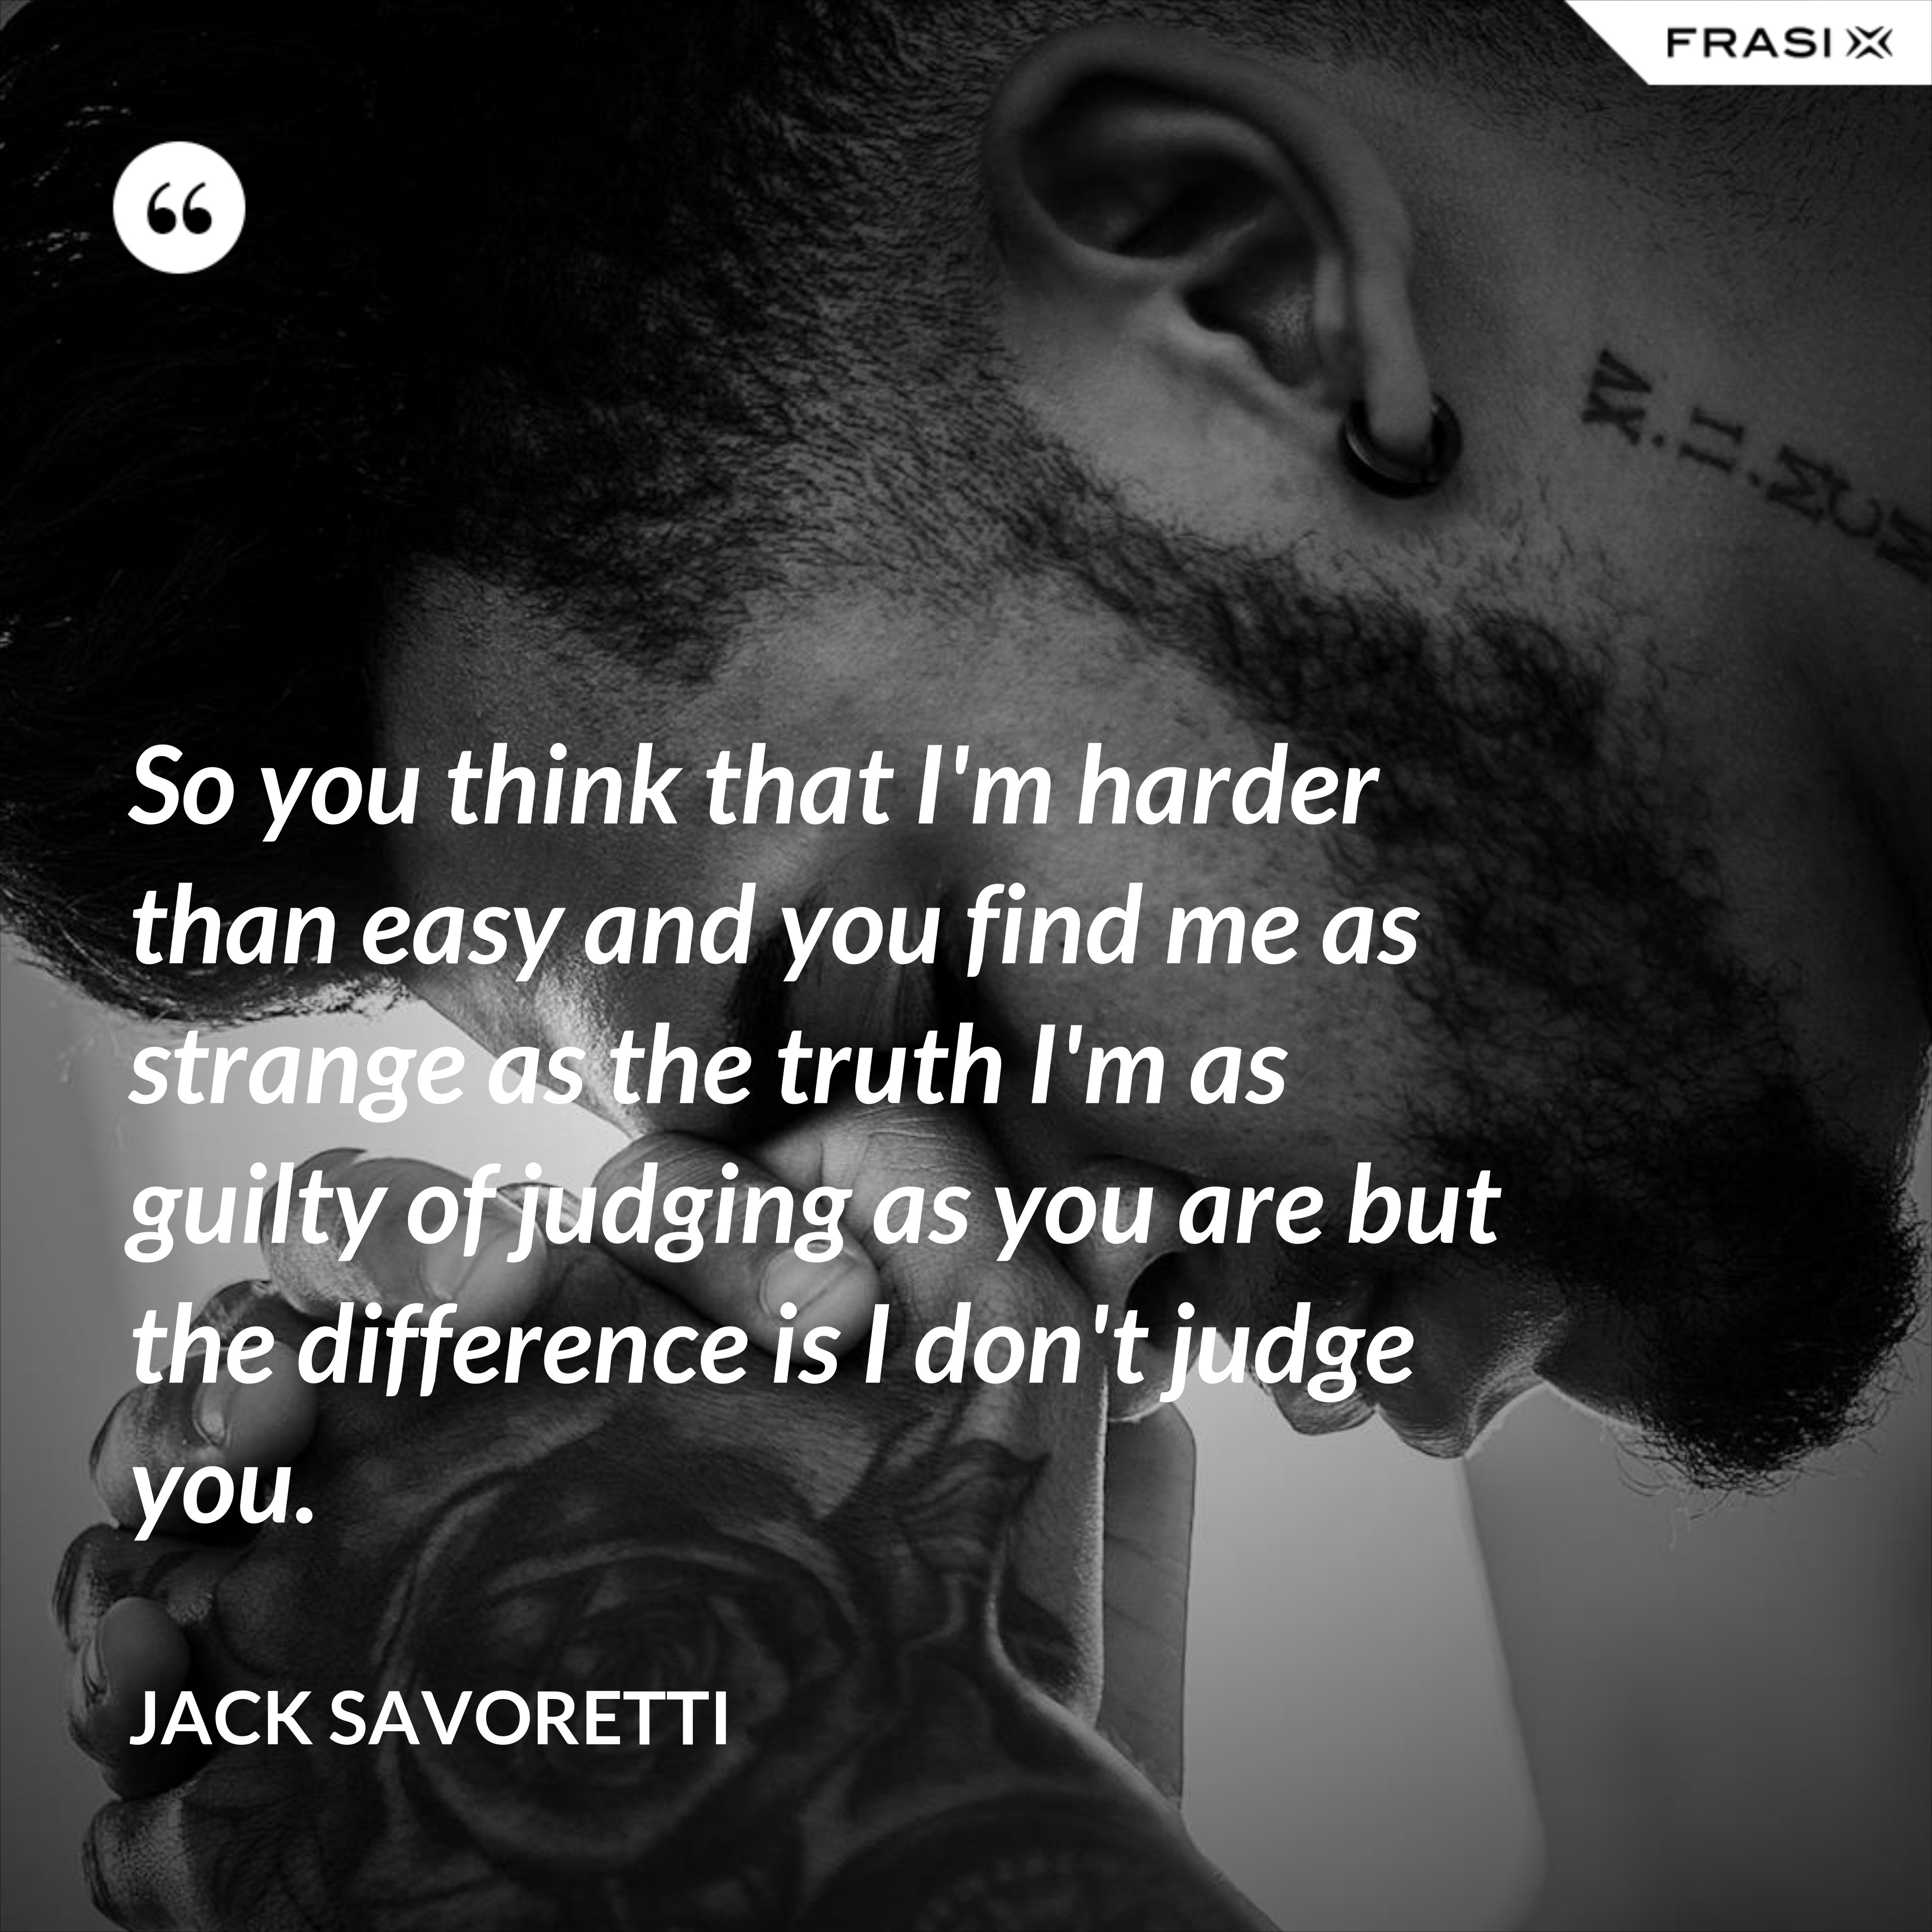 So you think that I'm harder than easy and you find me as strange as the truth I'm as guilty of judging as you are but the difference is I don't judge you. - Jack Savoretti